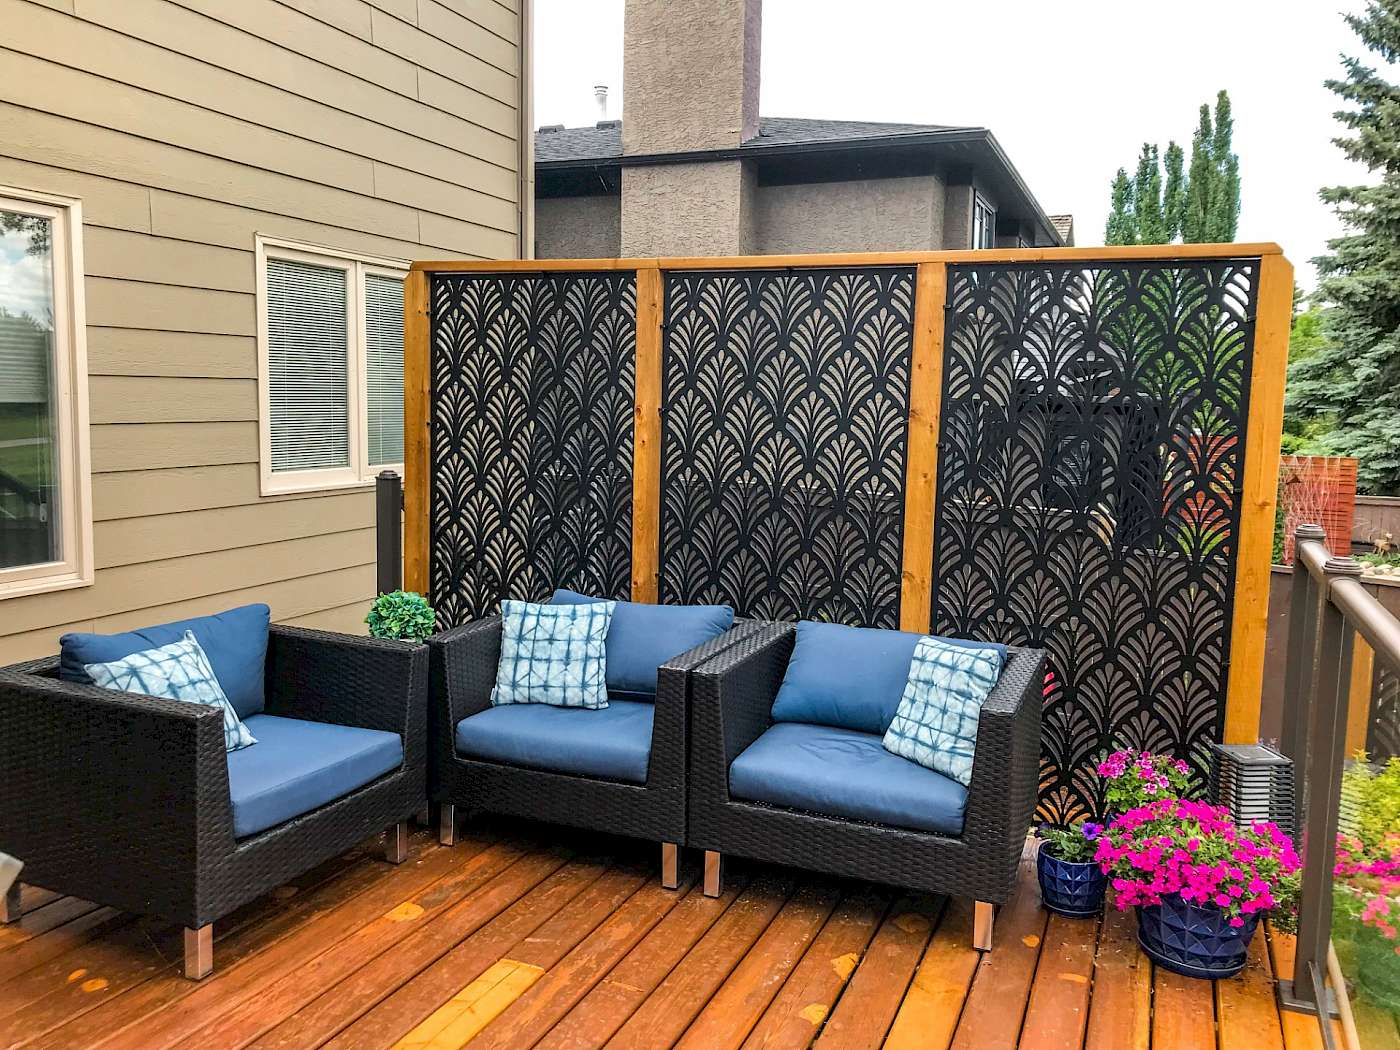 What Can I Use As An Outdoor Privacy Screen?